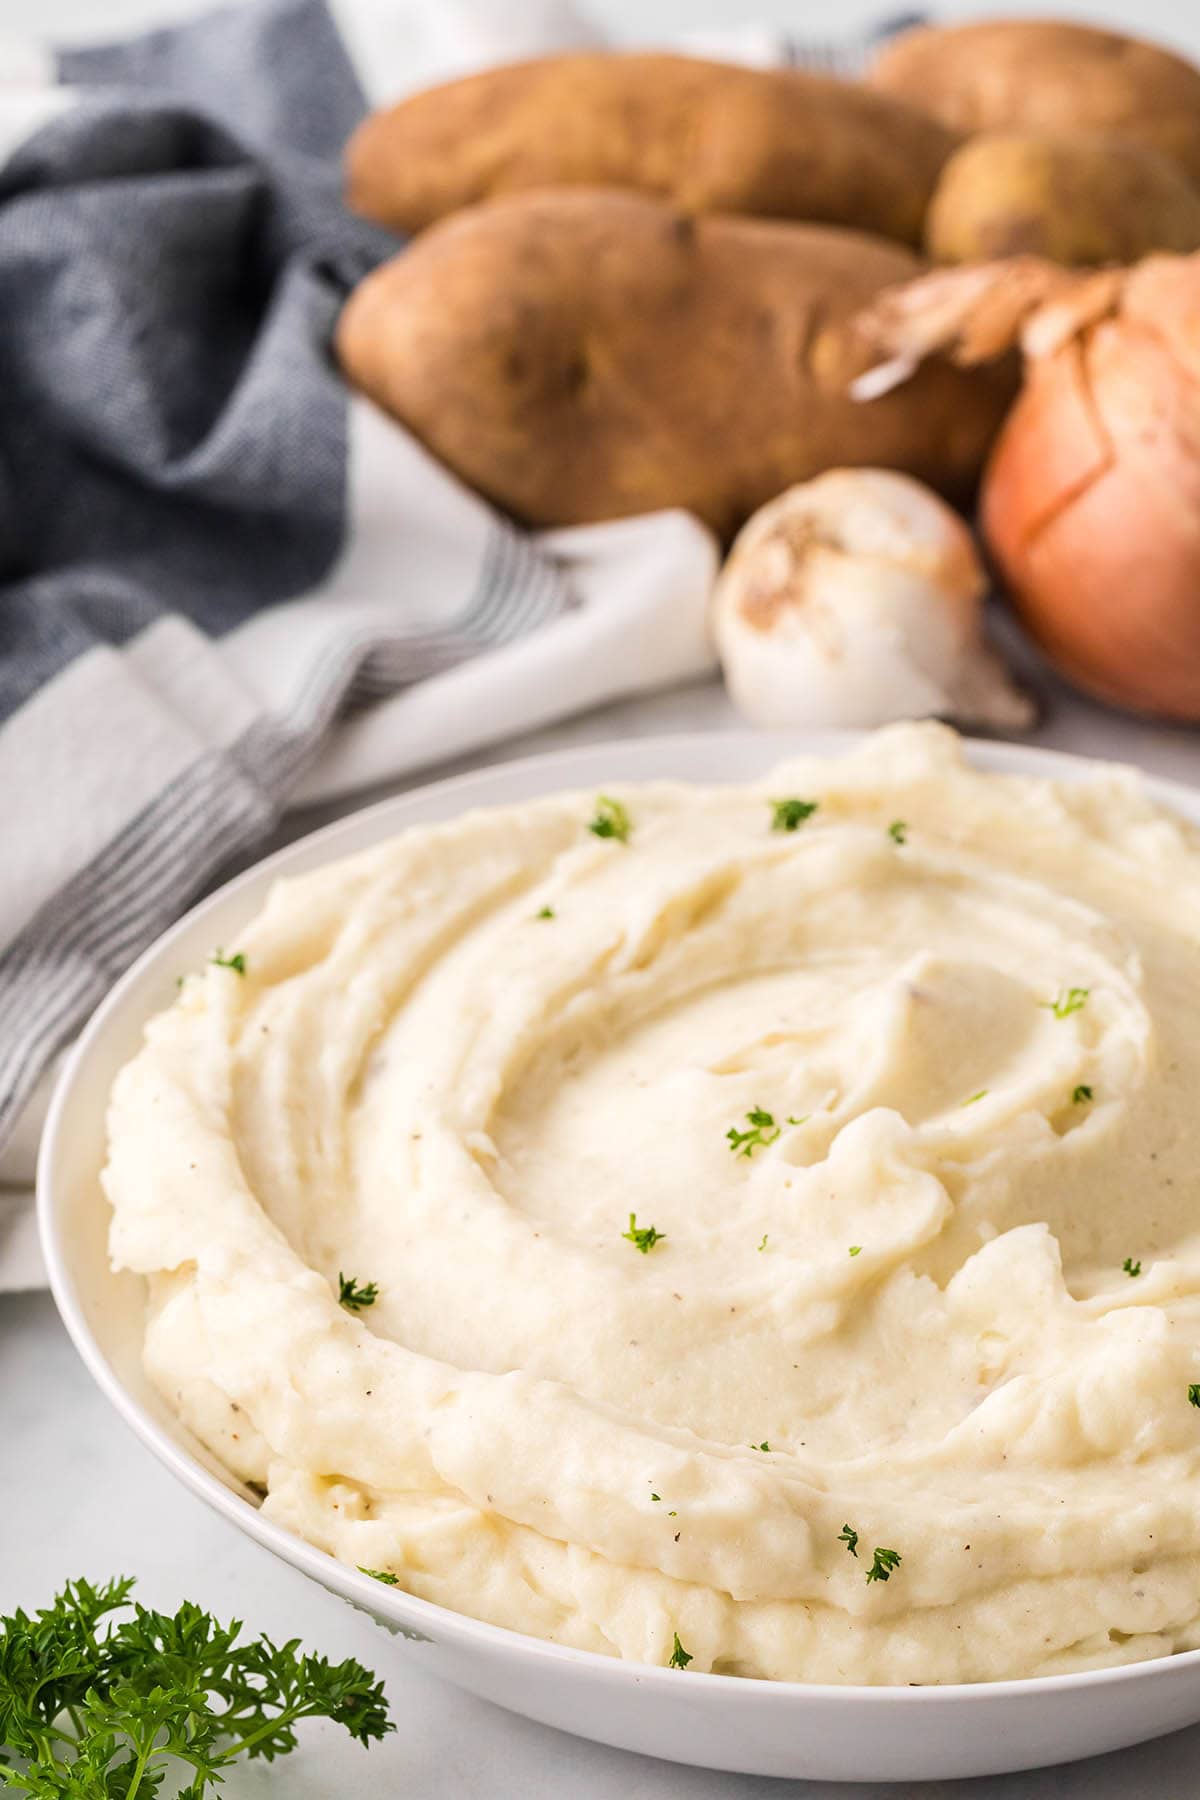 Large bowl filled with creamy mashed potatoes.